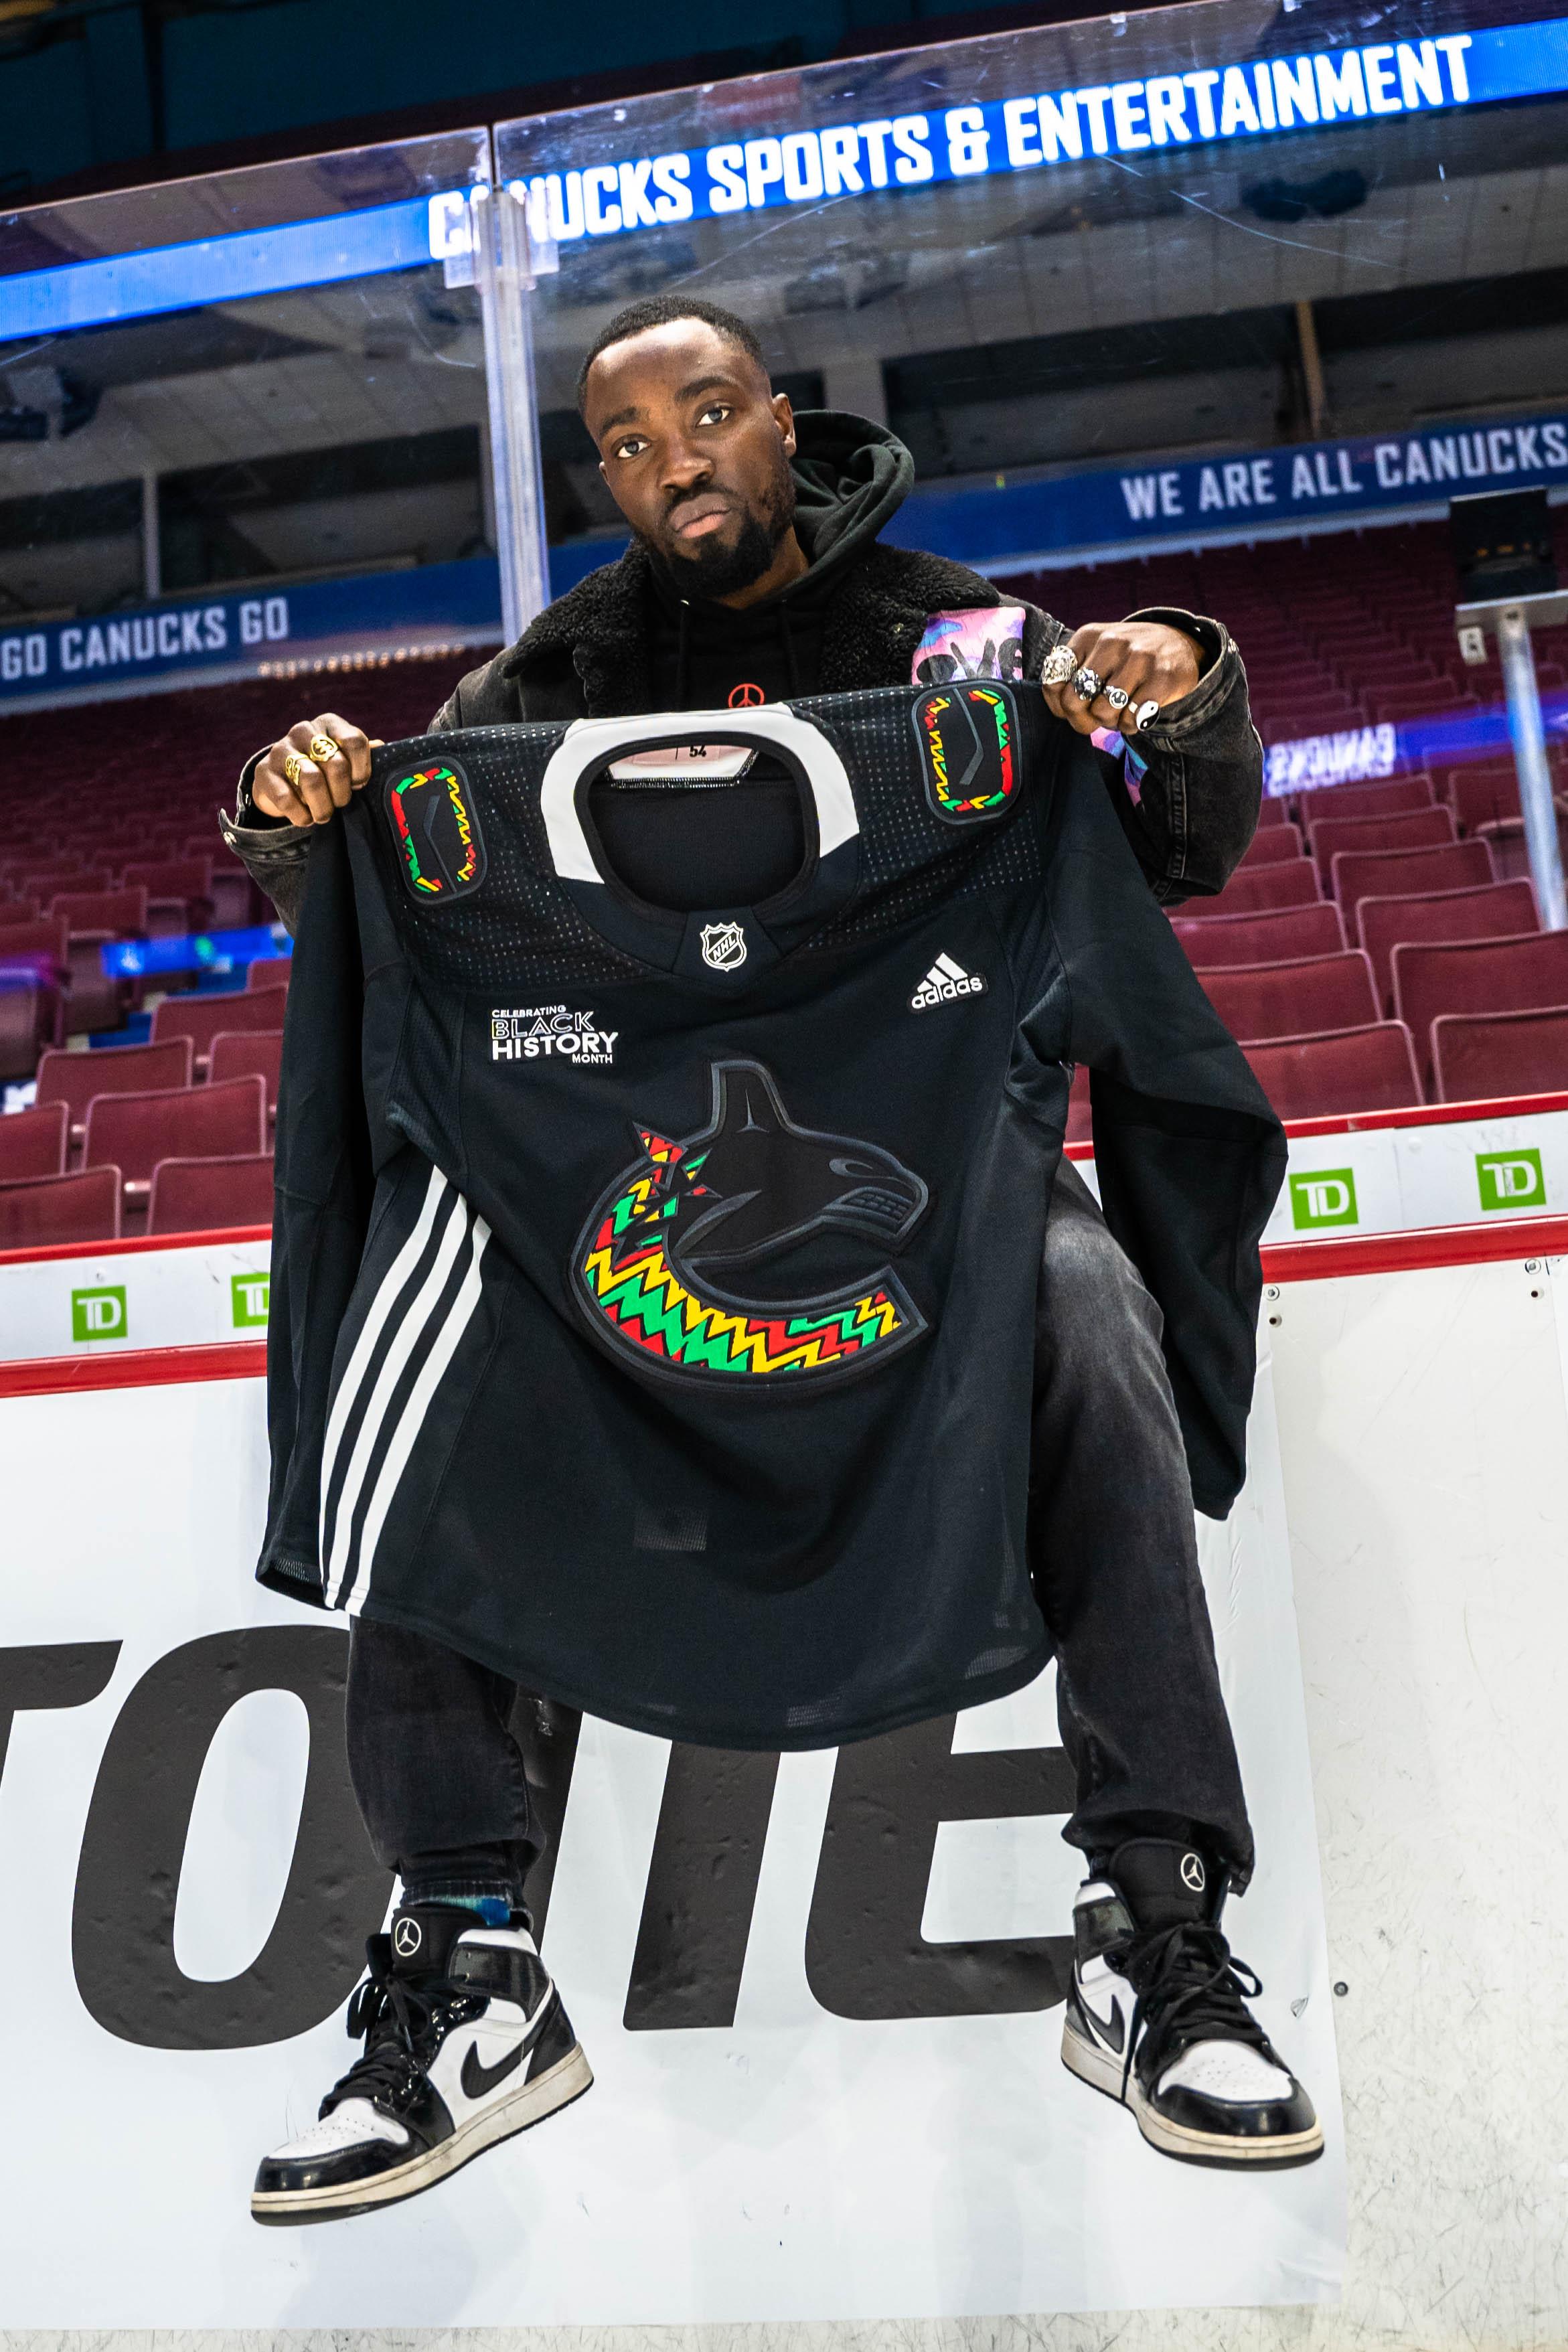 Canucks Twitter] Introducing the 2022 Canucks First Nations Night warm up  jersey, designed by Musqueam artist Chase Gray. The jersey was inspired by  traditional Coast Salish art and incorporates three Musqueam colours